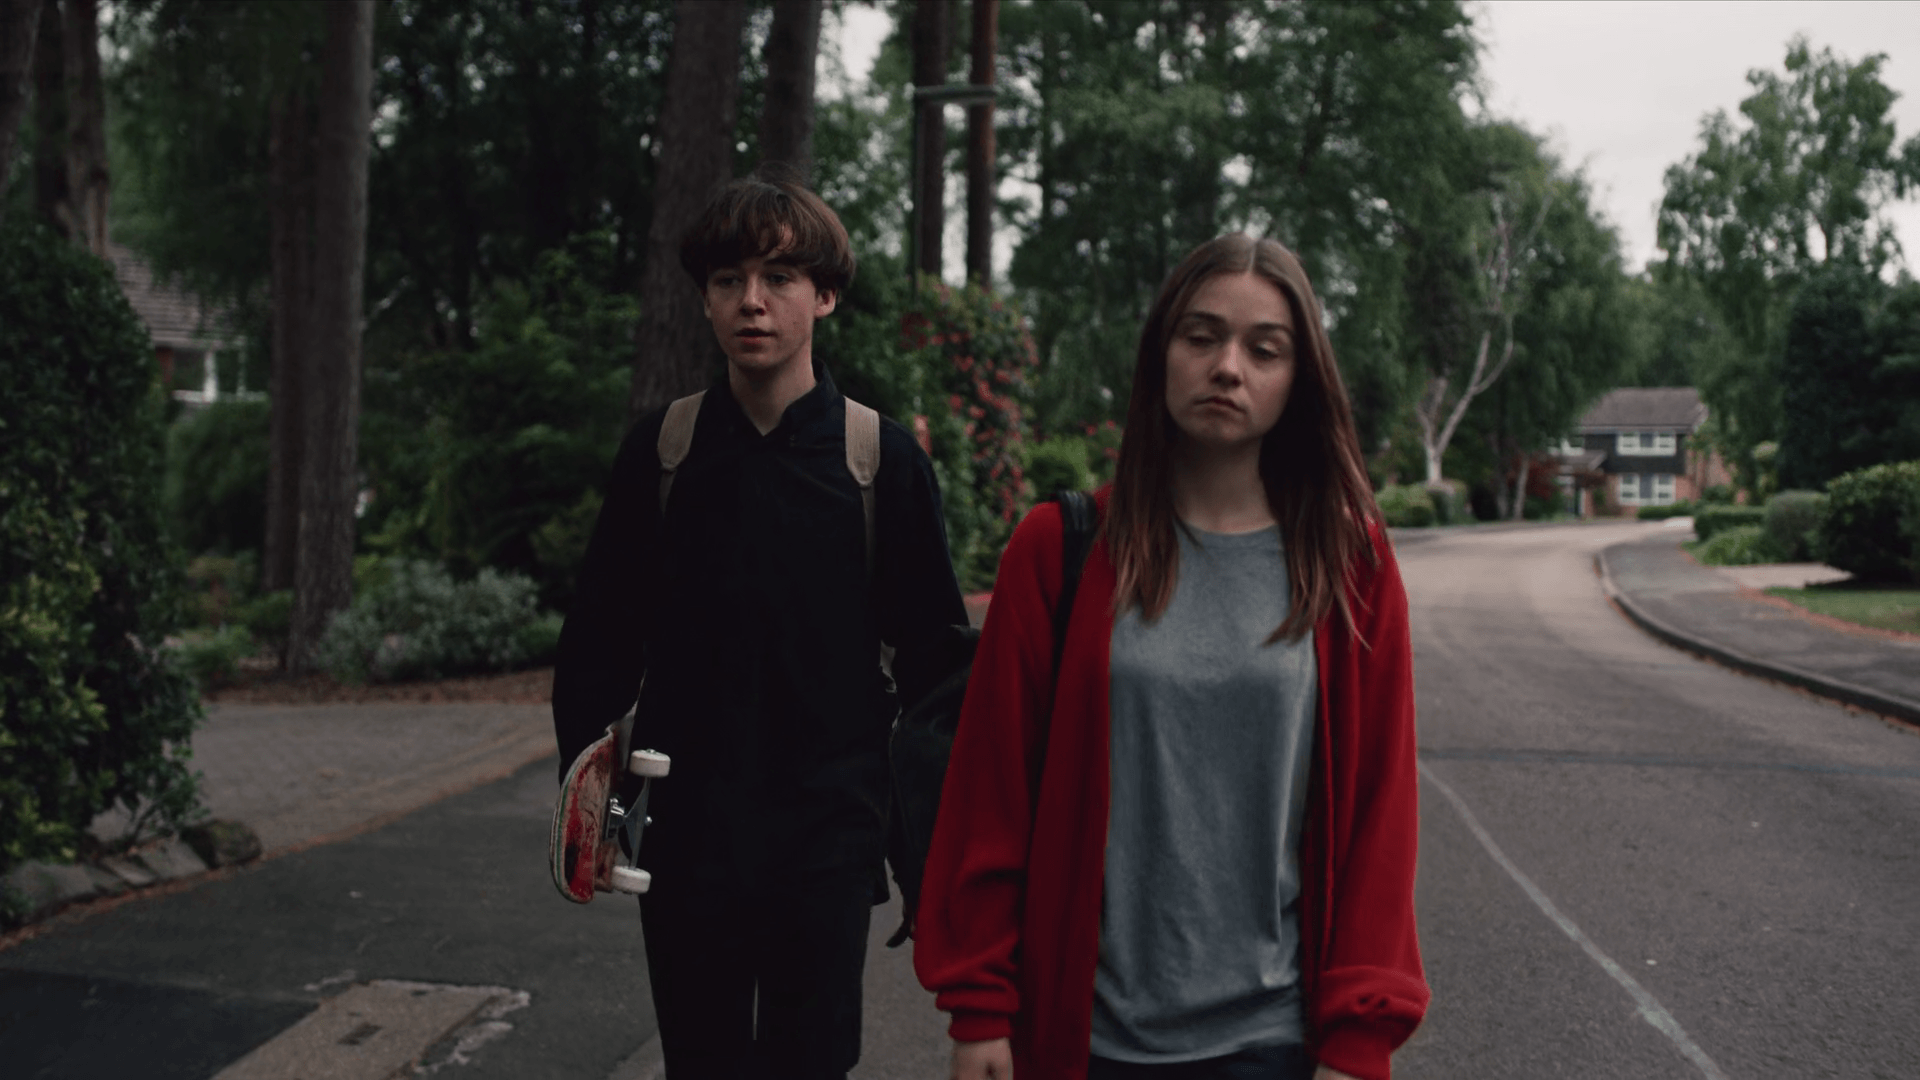 Download The End Of The F***ing World (2017) S01E01 (1080p WEB DL